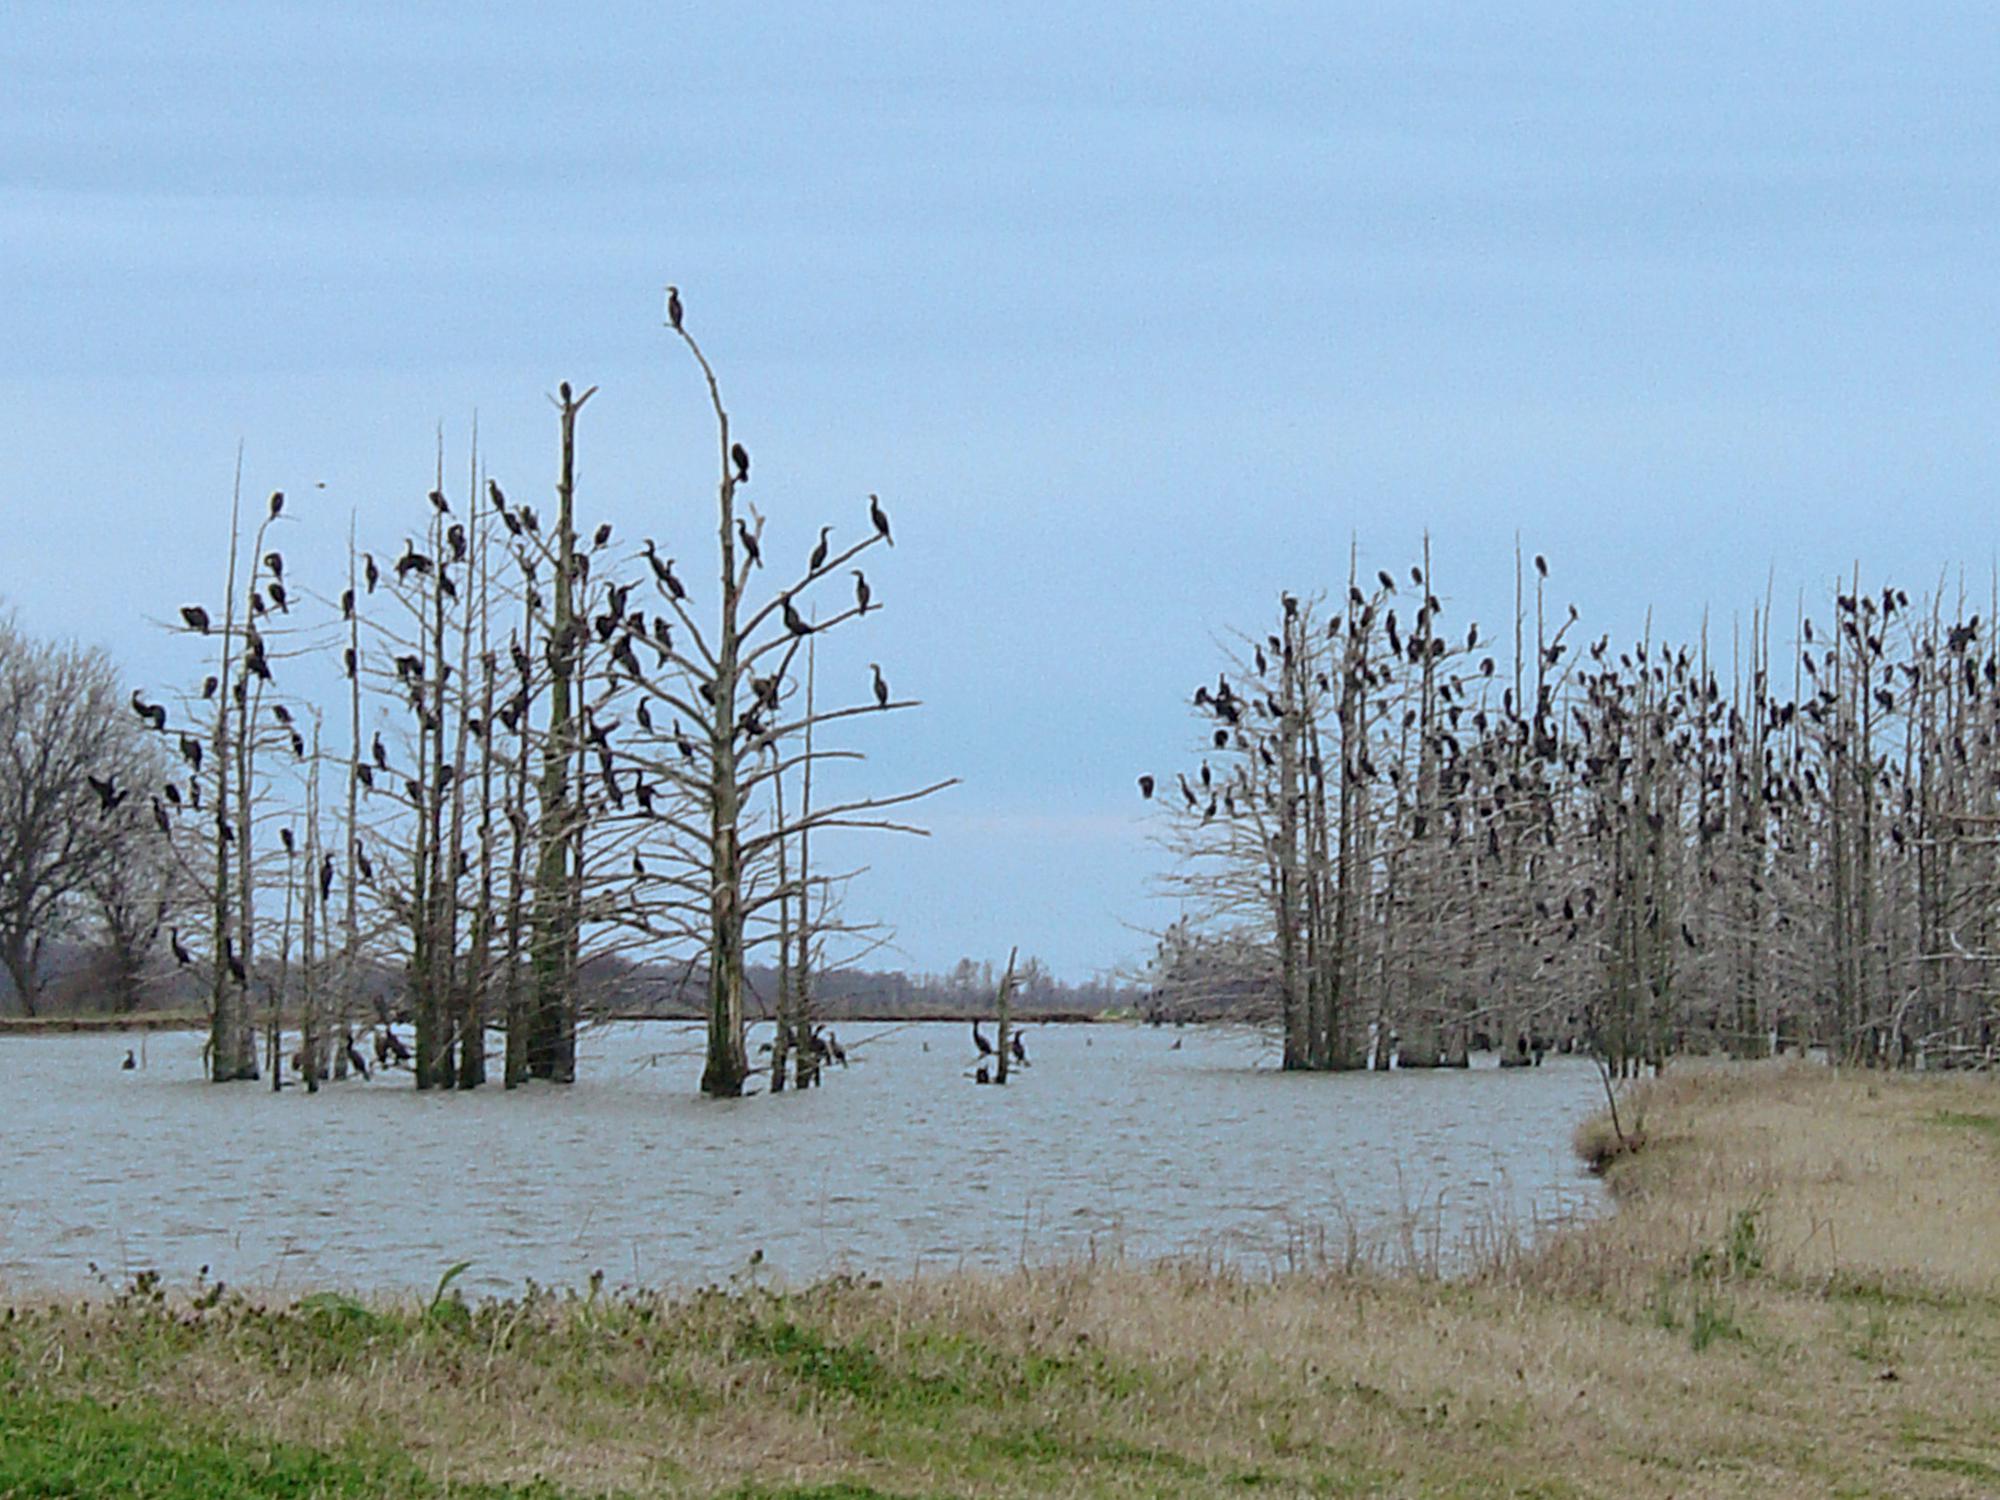 A lake with bare trees full of large birds perched in the branches.